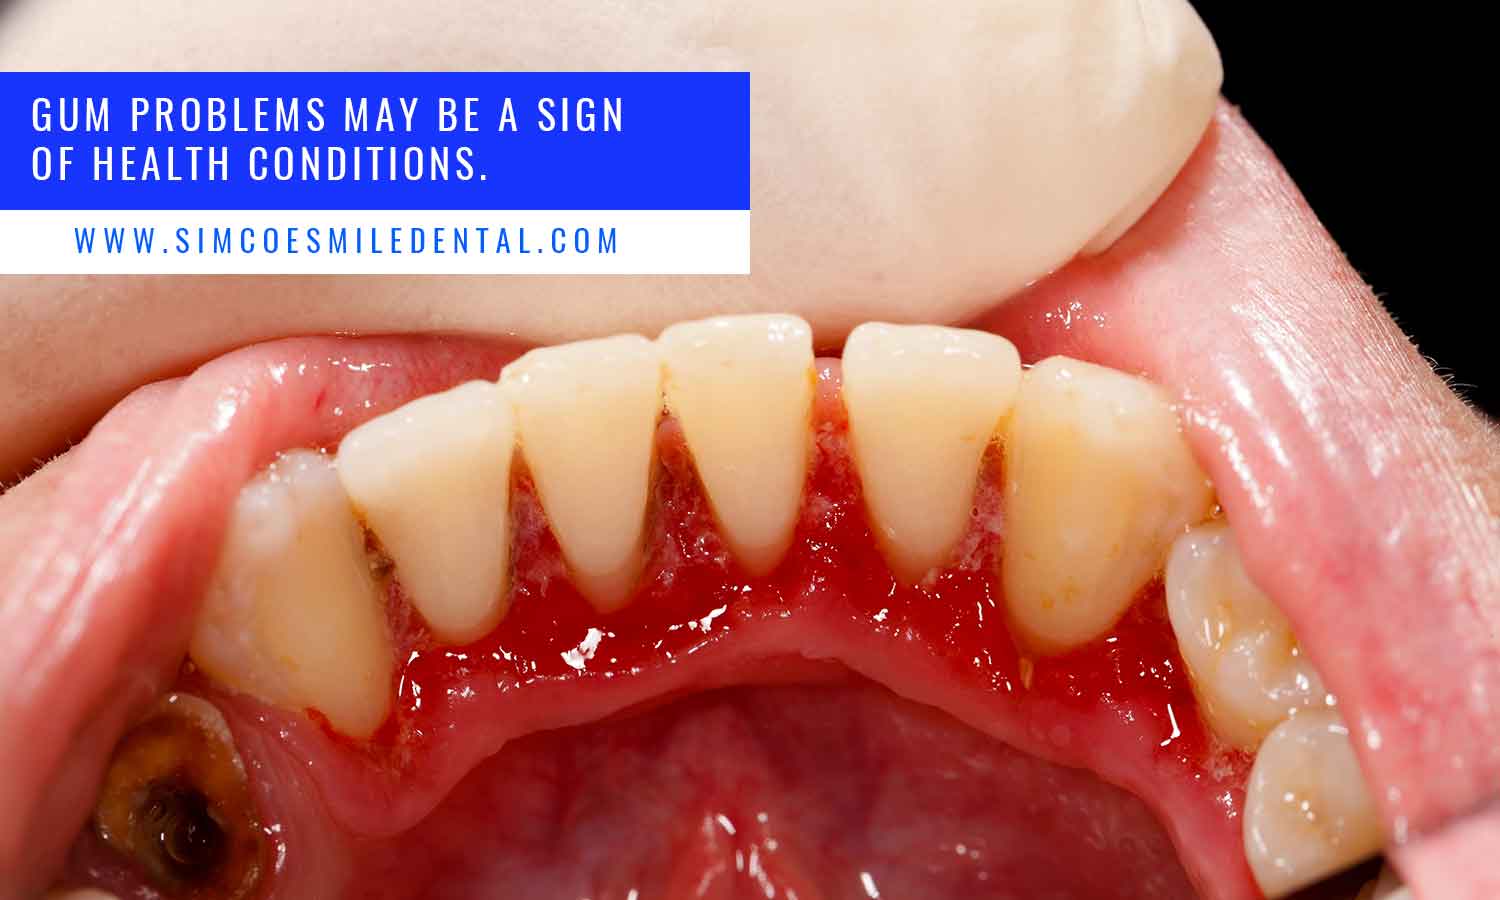 Gum problems may be a sign of health conditions.